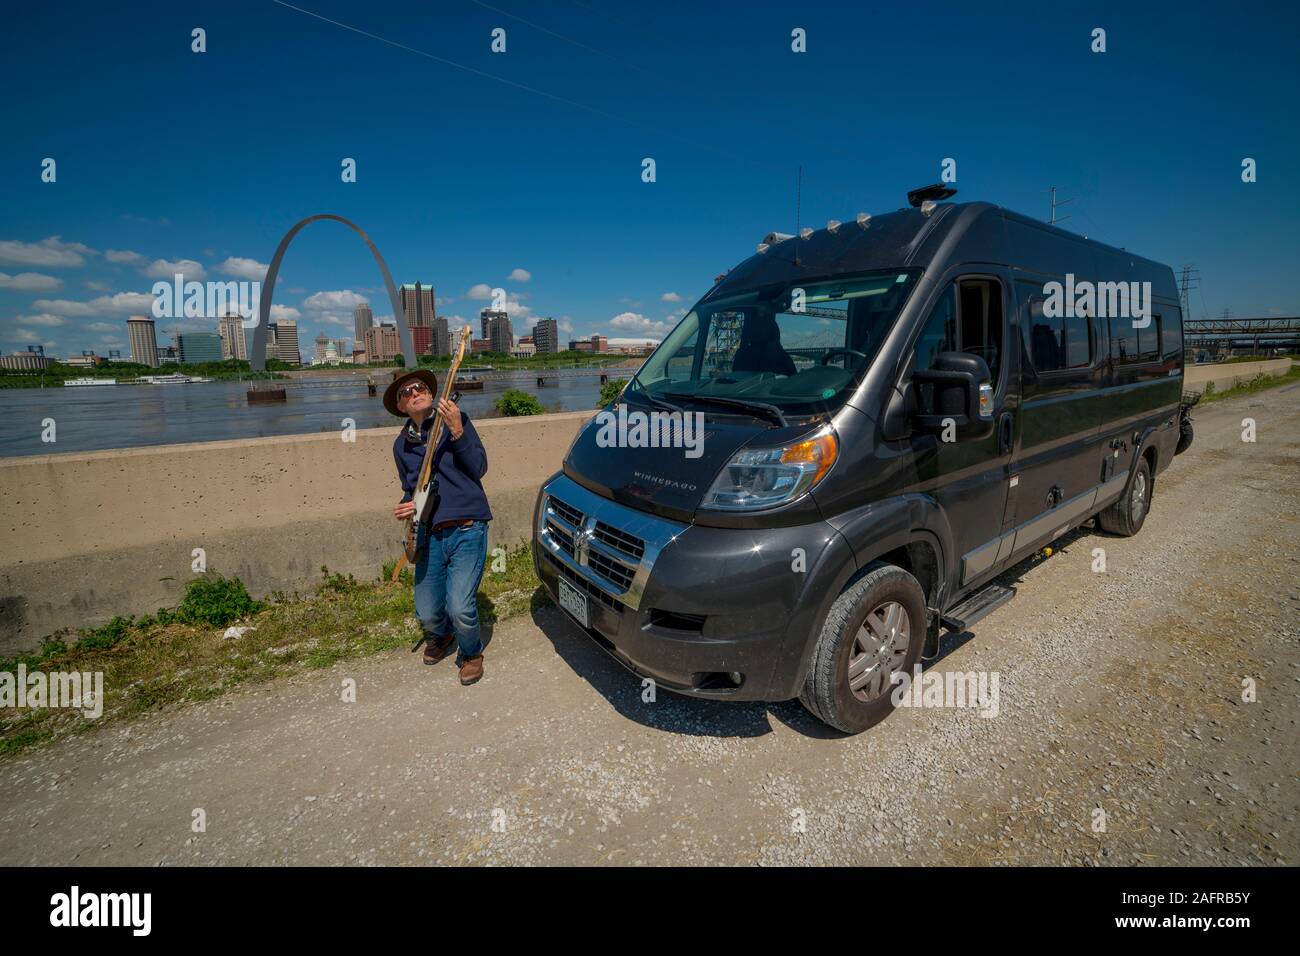 MAY 14, 2019, ST LOUIS, MO. USA Photographer and Bass Player Joe Sohm plays bass on Mississippi River front in front of St. Louis Arch and his RV Stock Photo